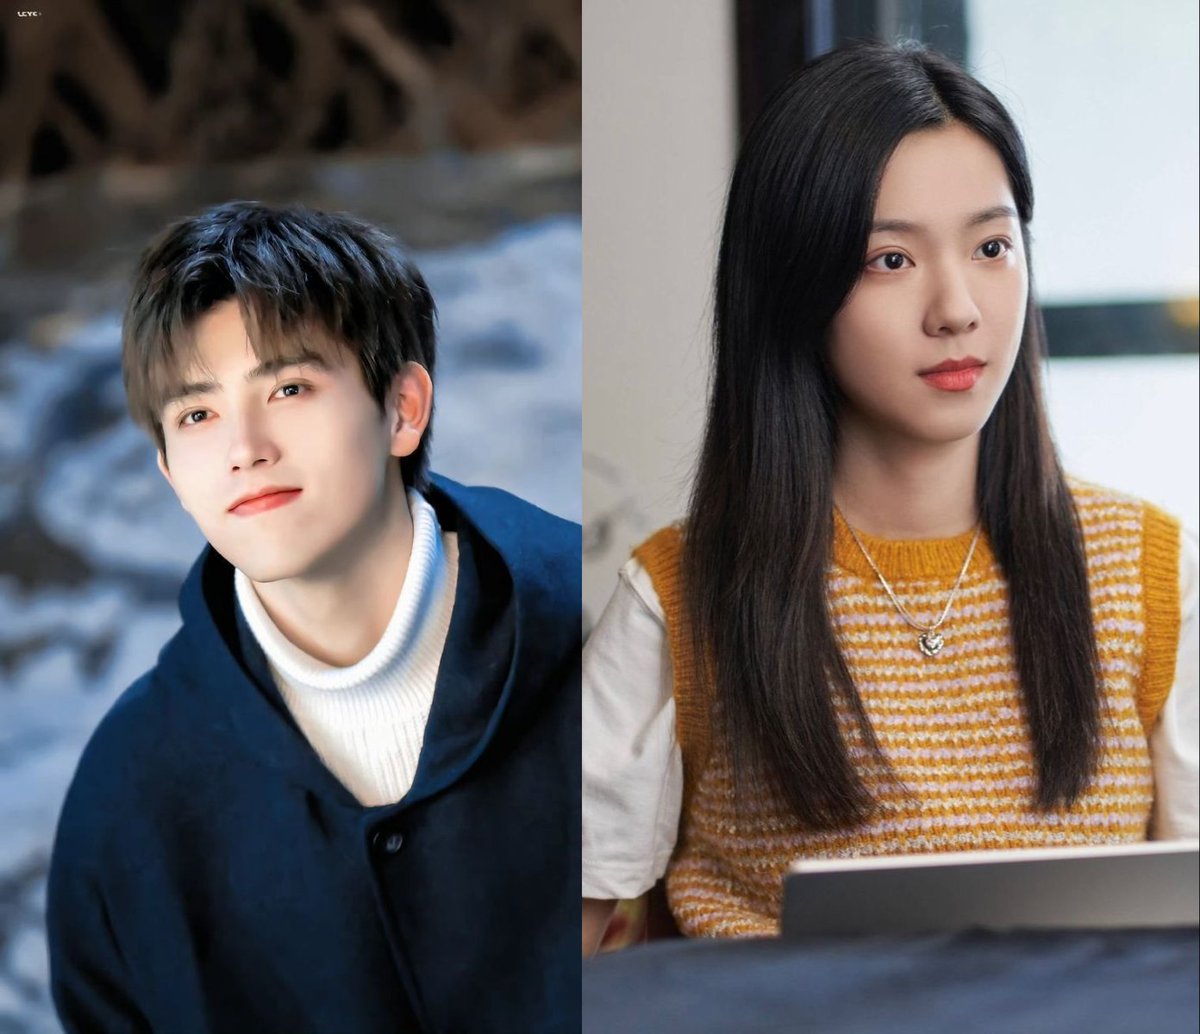 🍉 RUMOR!
YOUKU new TV Series will be produce soon. Adapted from 陈之遥 Chen Zhi Yao Novel, #拜金罗曼史/ #ABillionDollarRomance.

Genre : Urban, Romance
Episode : 30
Main cast :
#ChenFeiYu (#ArthurChen)
#ZhuangDaFei

Expected to start filming end of May 2024.

~Weibo 08 Apr 2024~